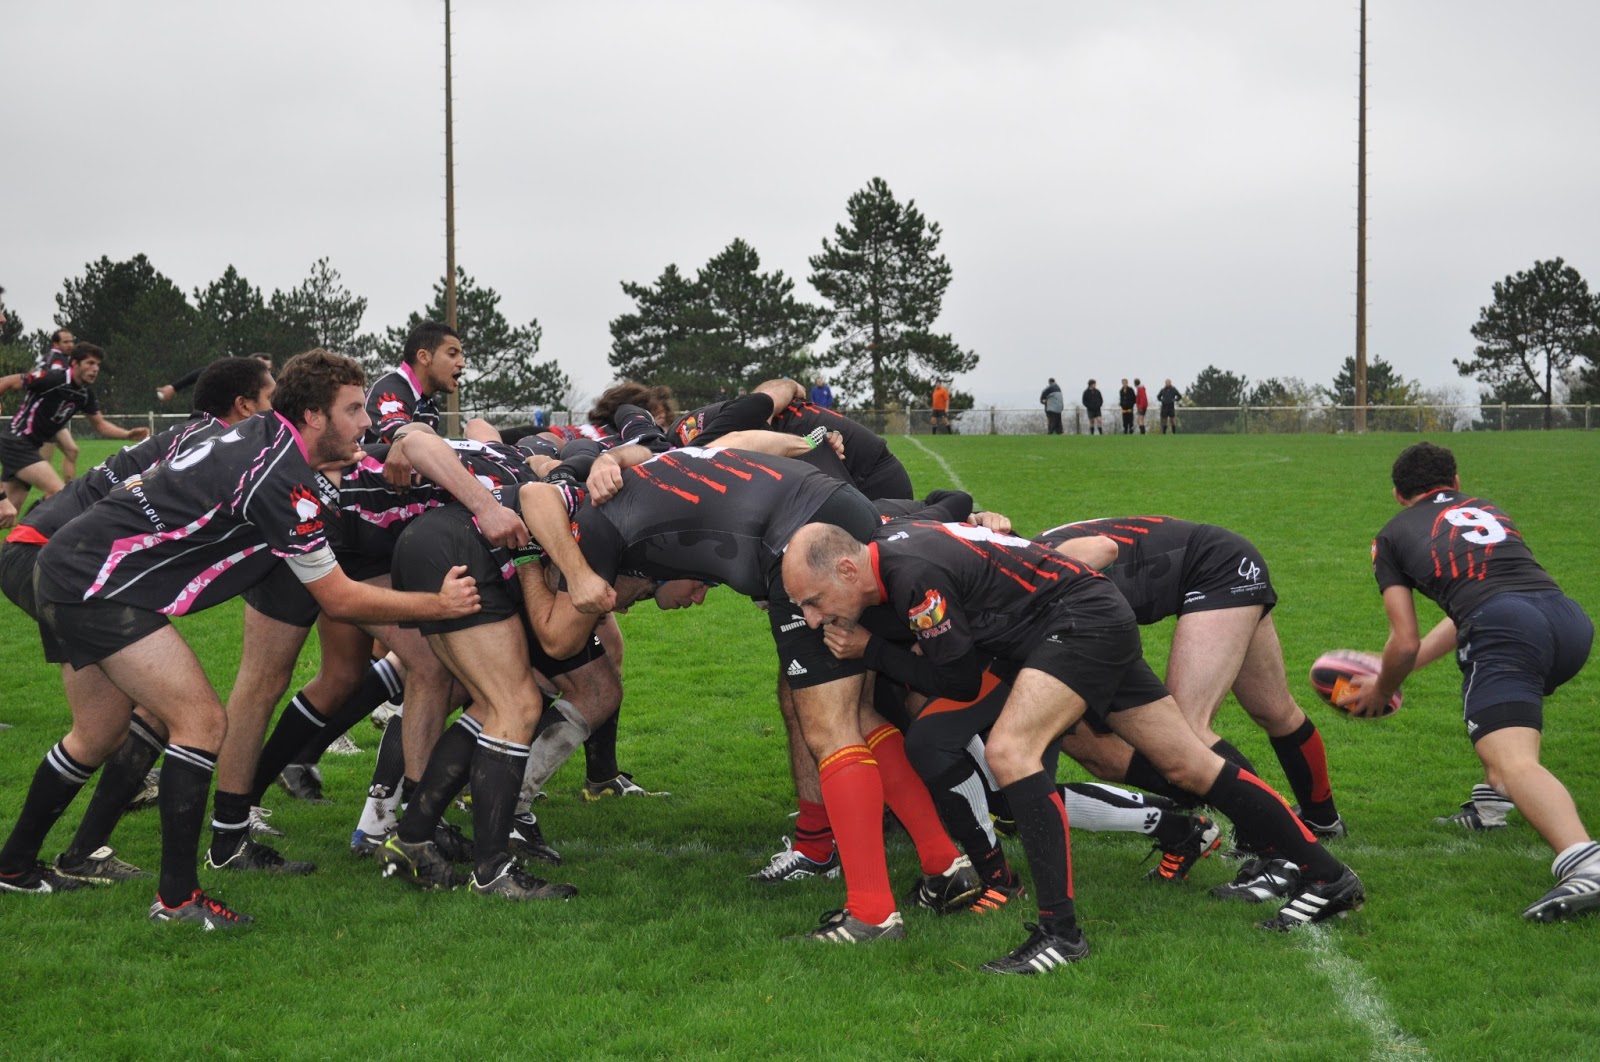 Les-Rebelyons-équipe-rugby-gay-friendly-lyon-heteroclite-avril-2014